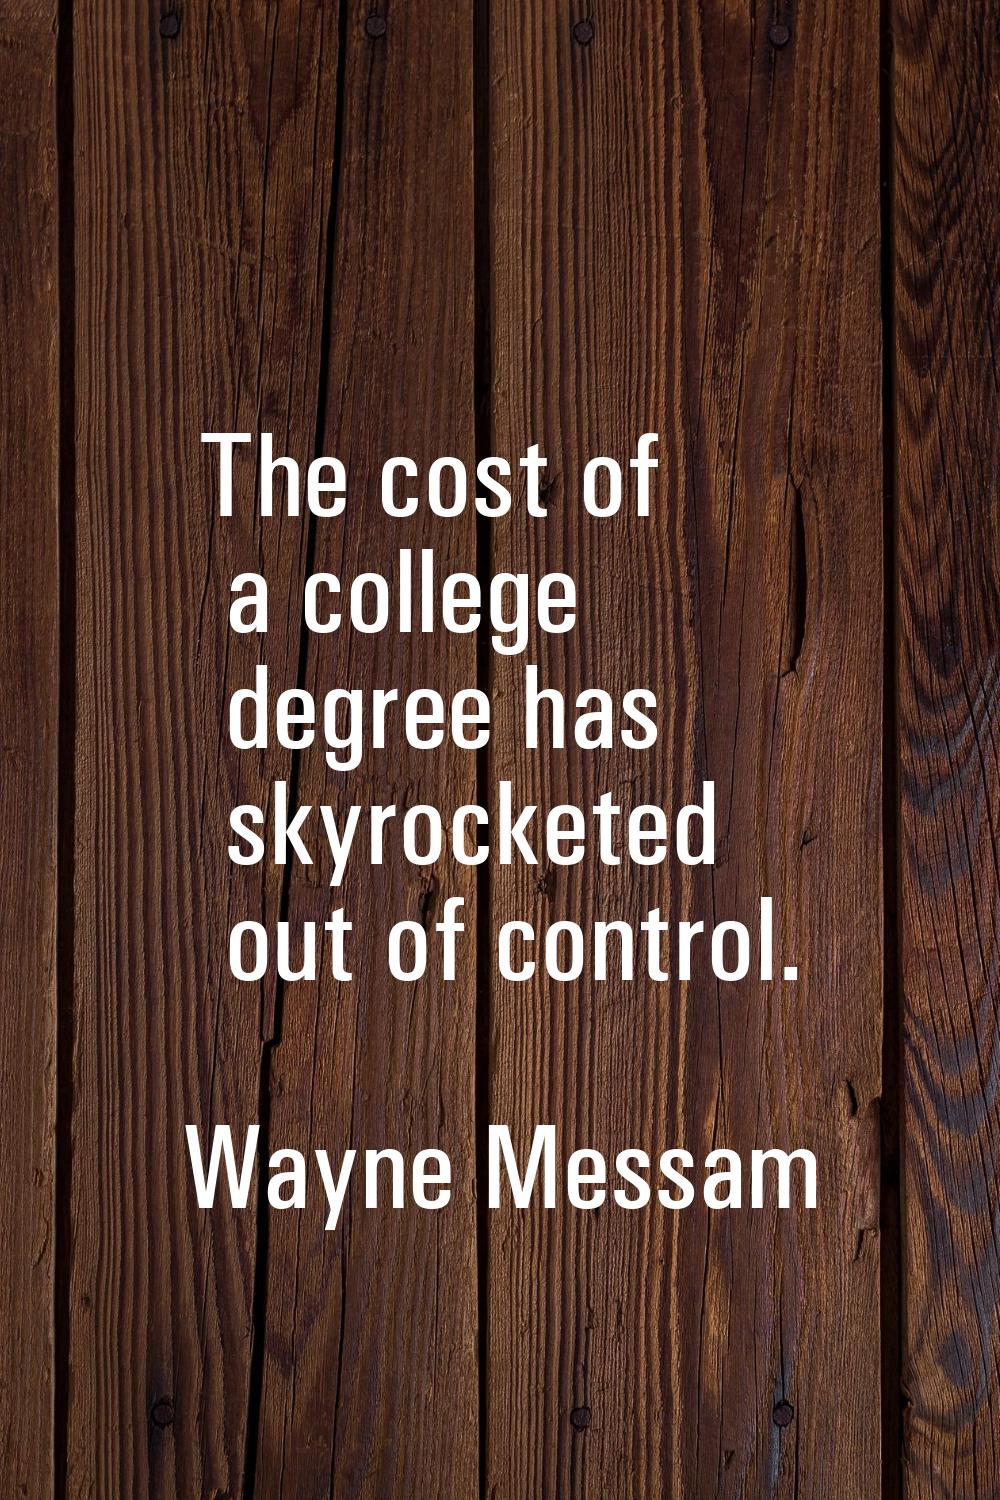 The cost of a college degree has skyrocketed out of control.